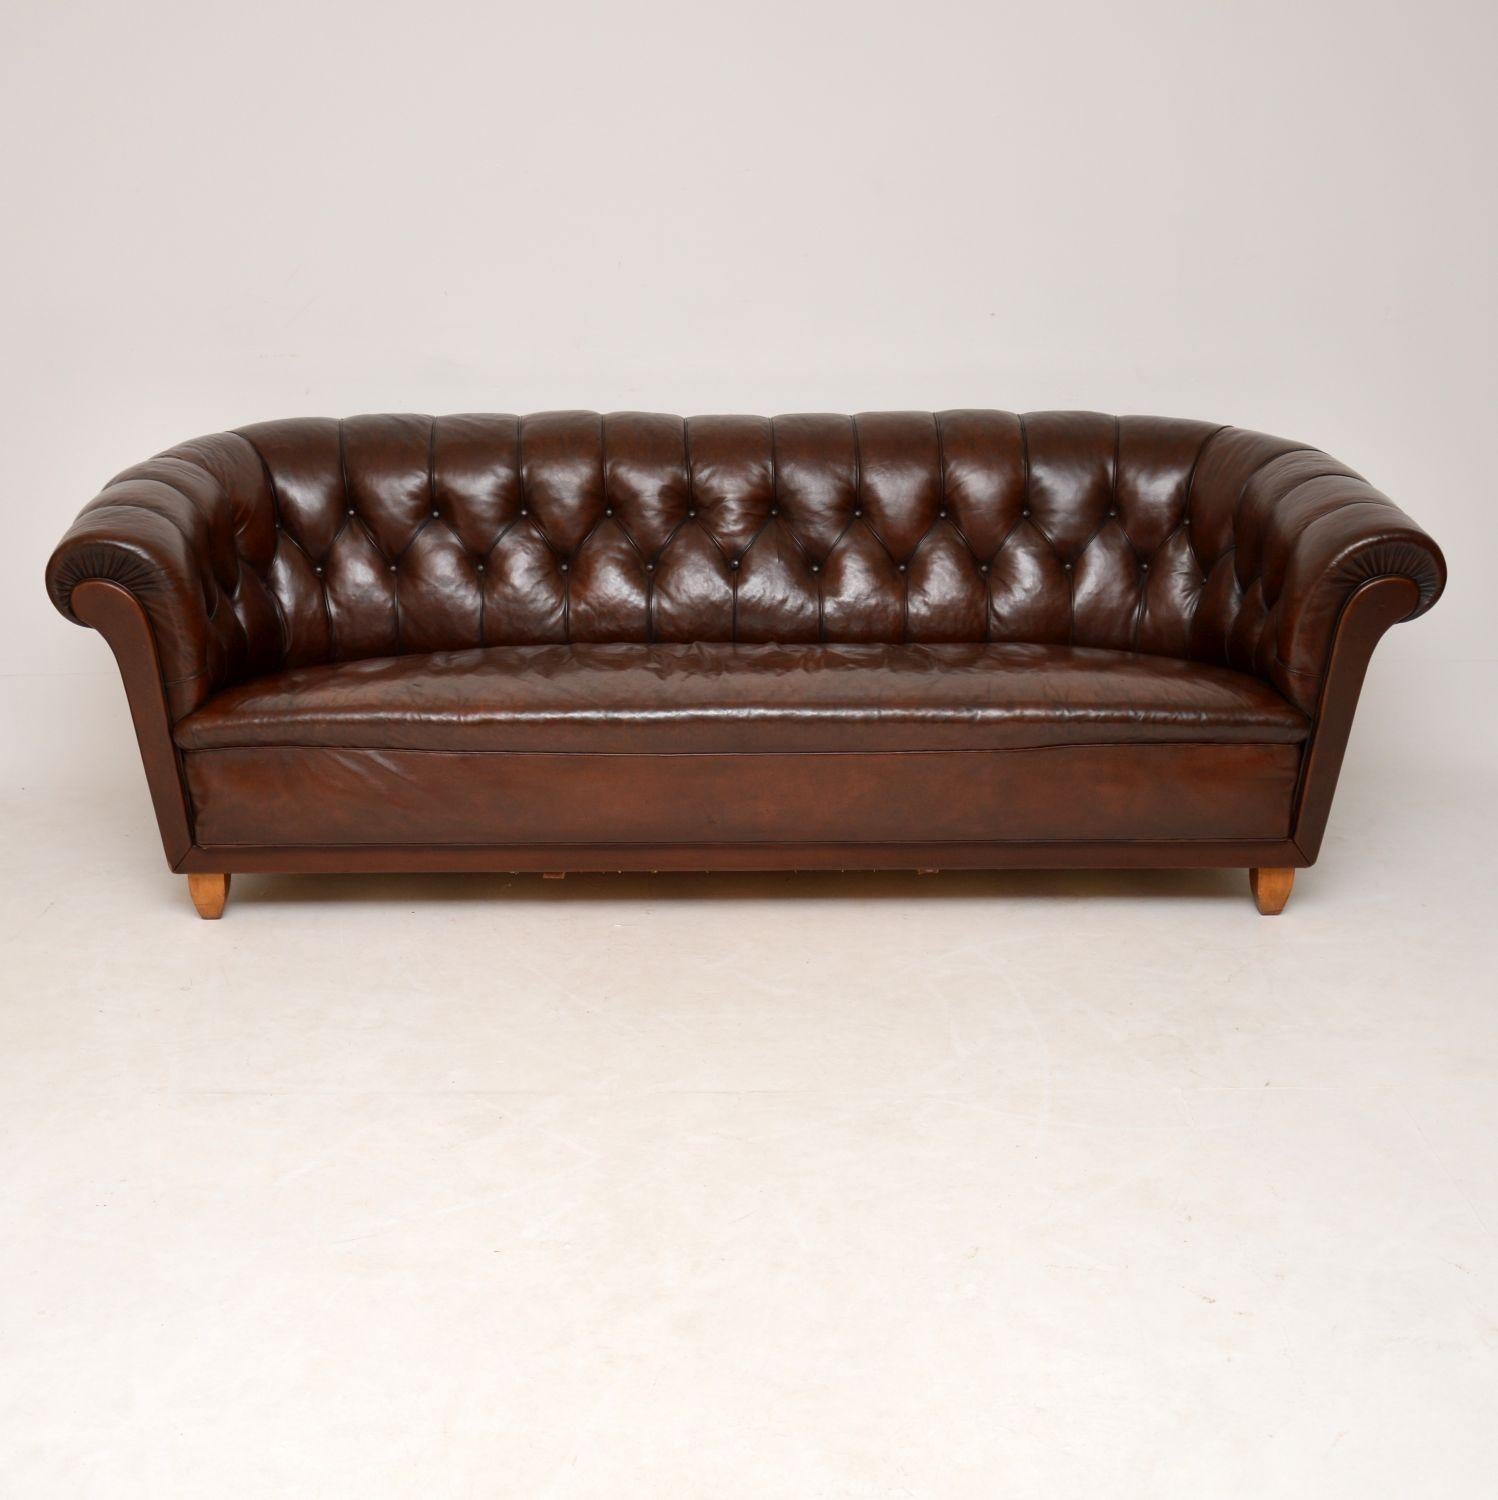 This antique Swedish Chesterfield sofa still has the original leather on it and the colour is wonderful. It’s a Swedish take on an English Victorian Chesterfield and is very stylish. The leather is deep buttoned and has been professionally polished,